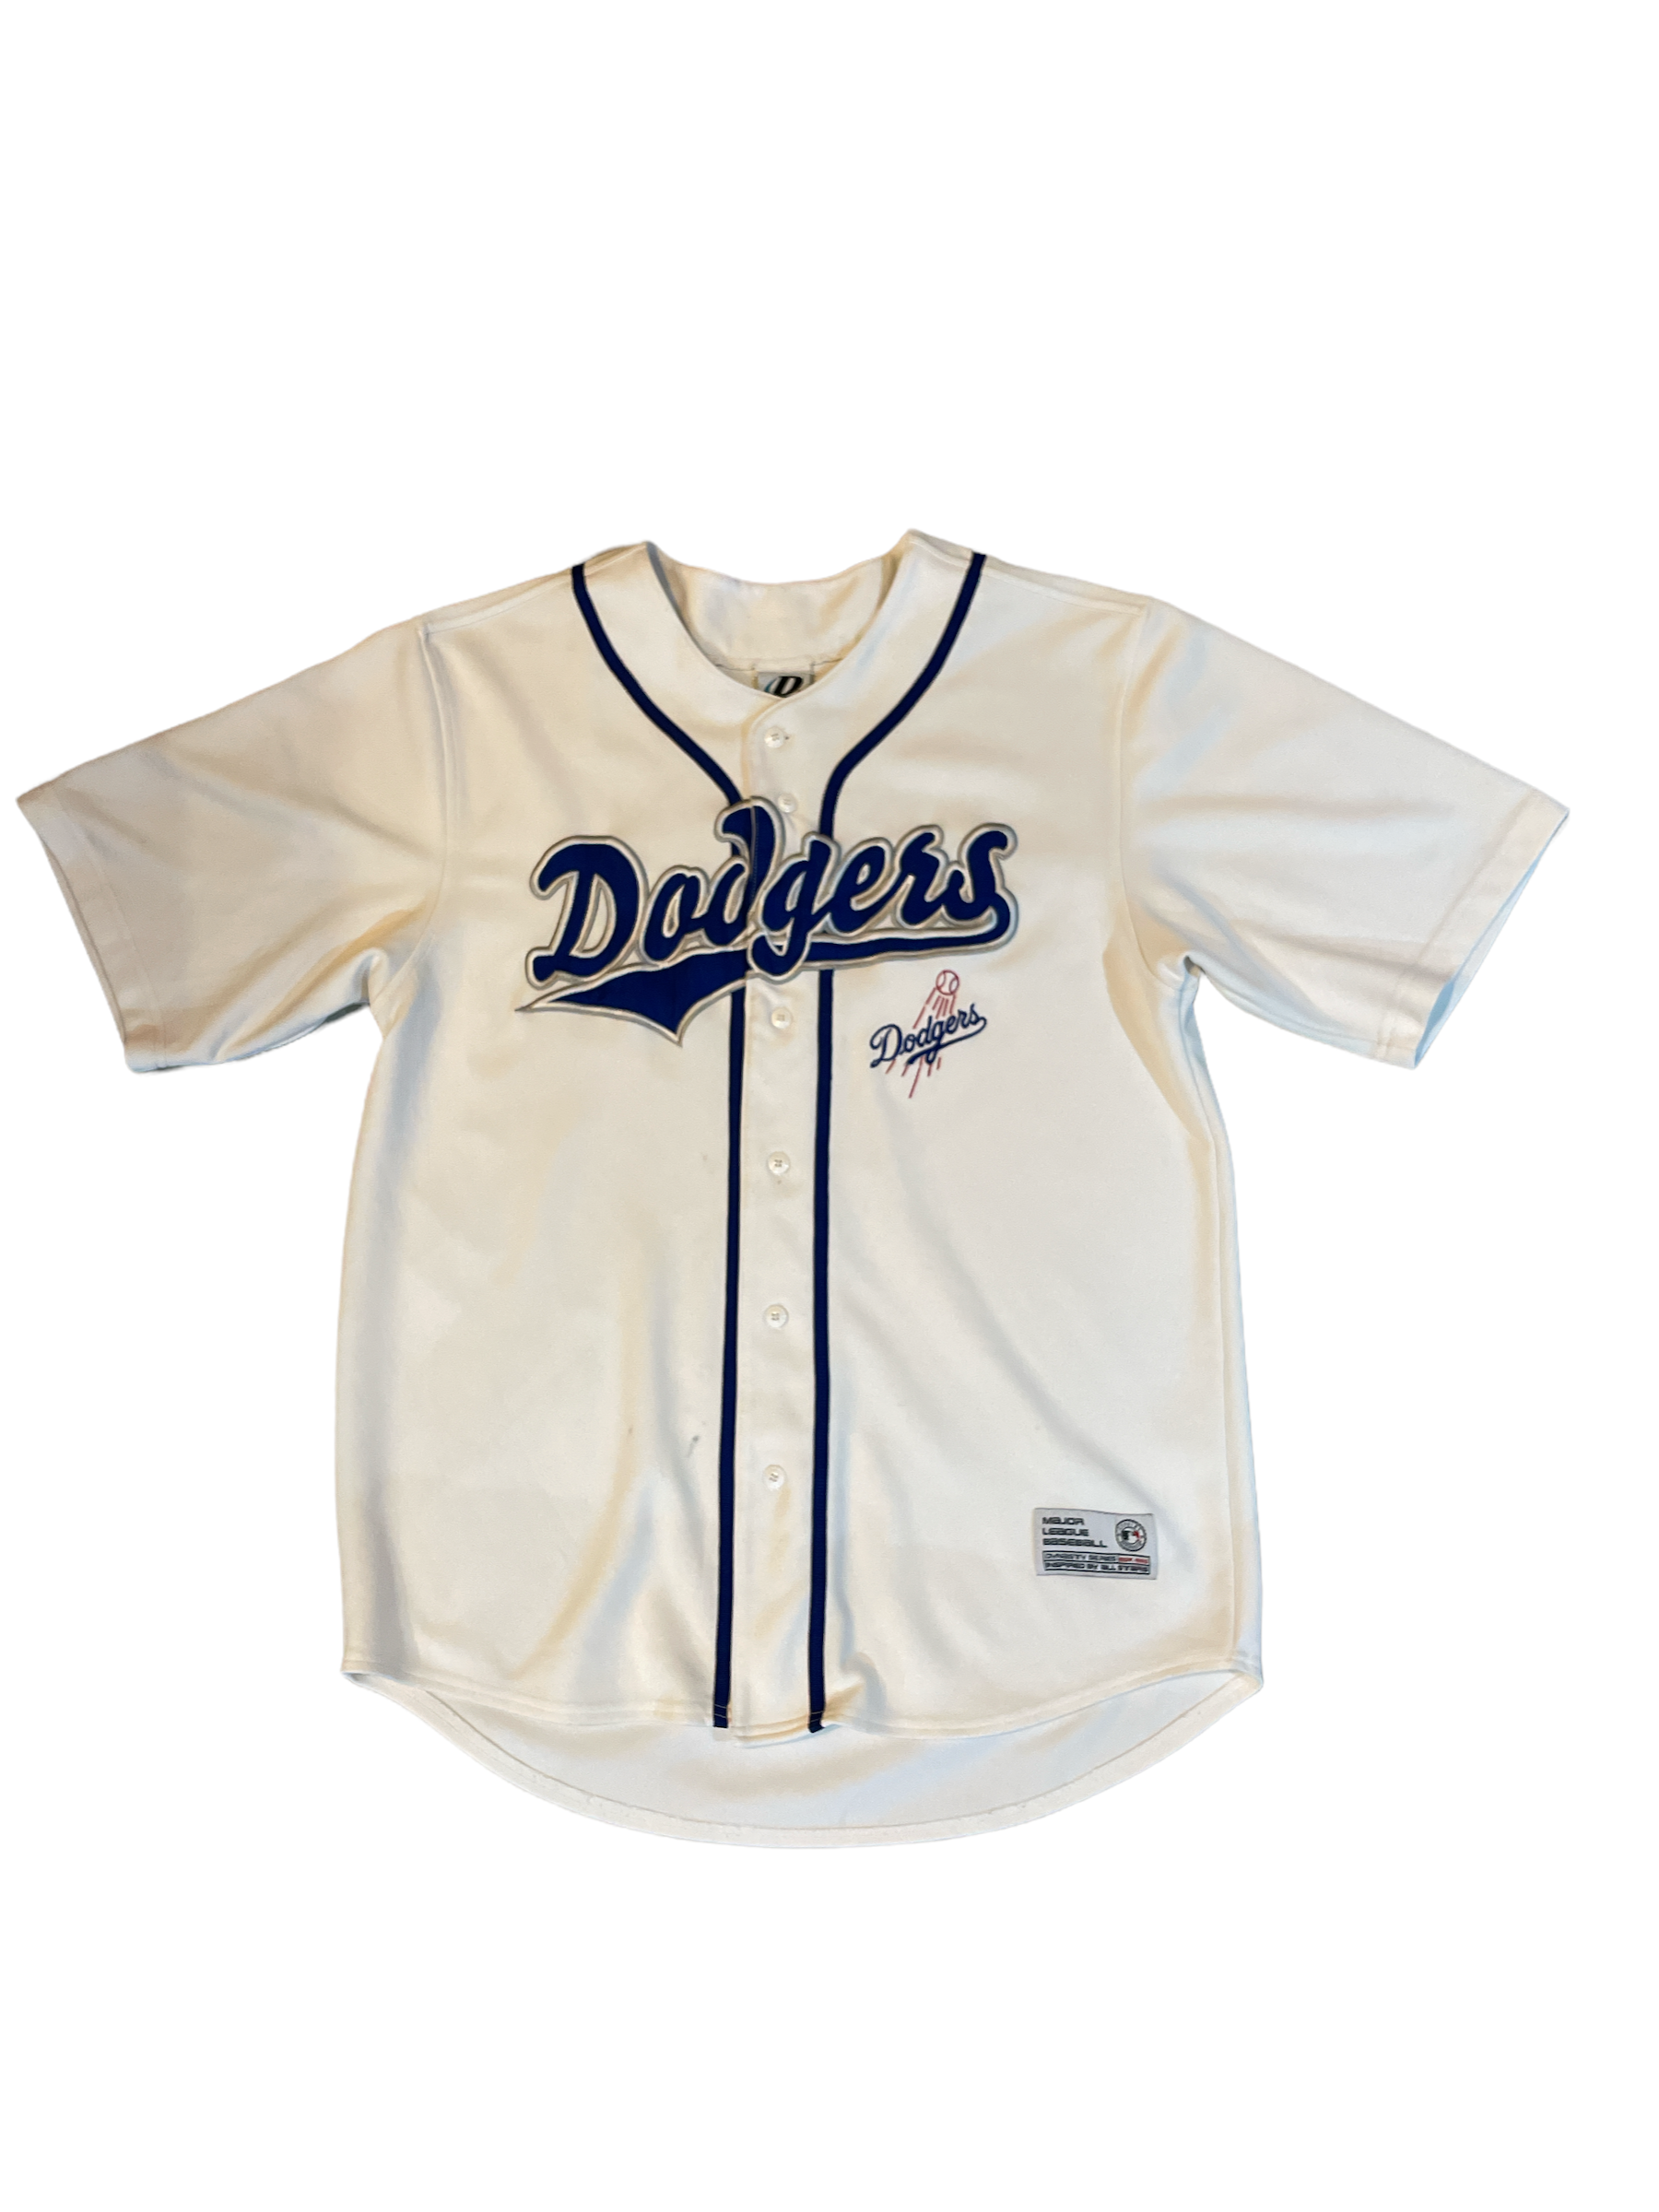 100% Authentic Mitchell & Ness 1955 Jackie Robinson Dodgers